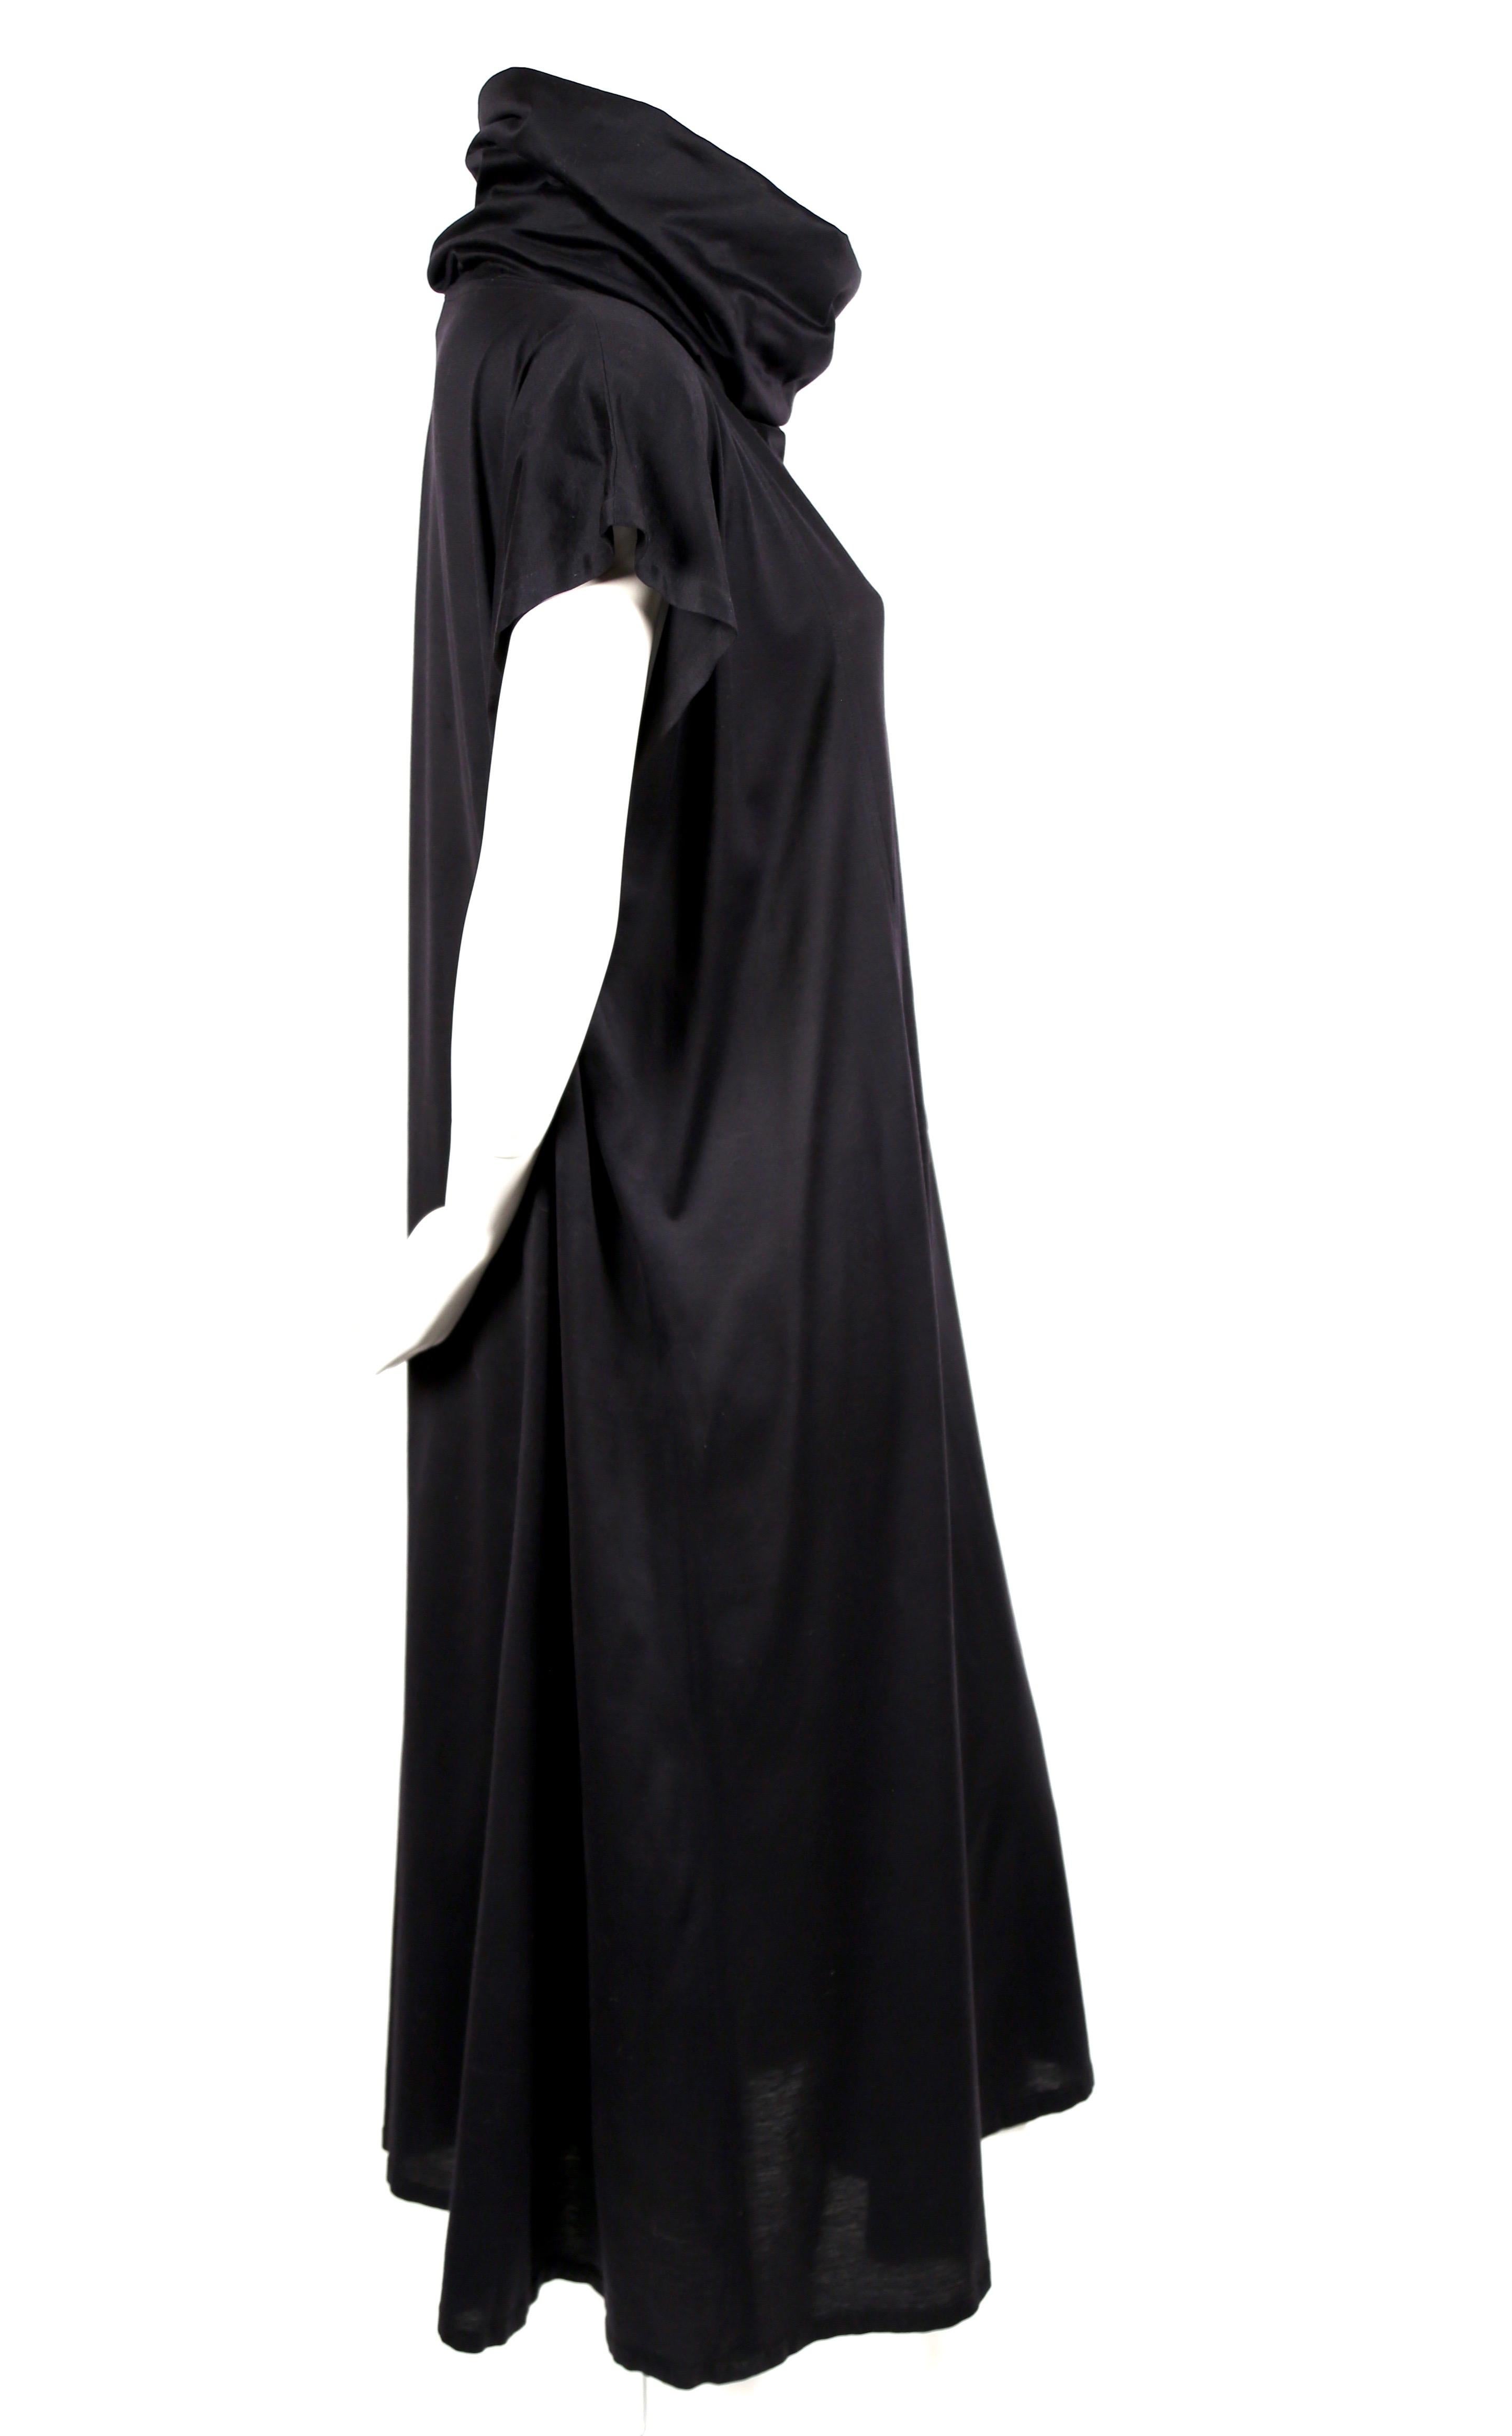 Jet-black, fine-gauge, cotton jersey dress with cowl neckline and angled patch pocket at front designed by Kenzo Takada dating to 1985 as seen on the Kenzo spring runway. Dress is labeled a French size 36 however due to the loose cut it can